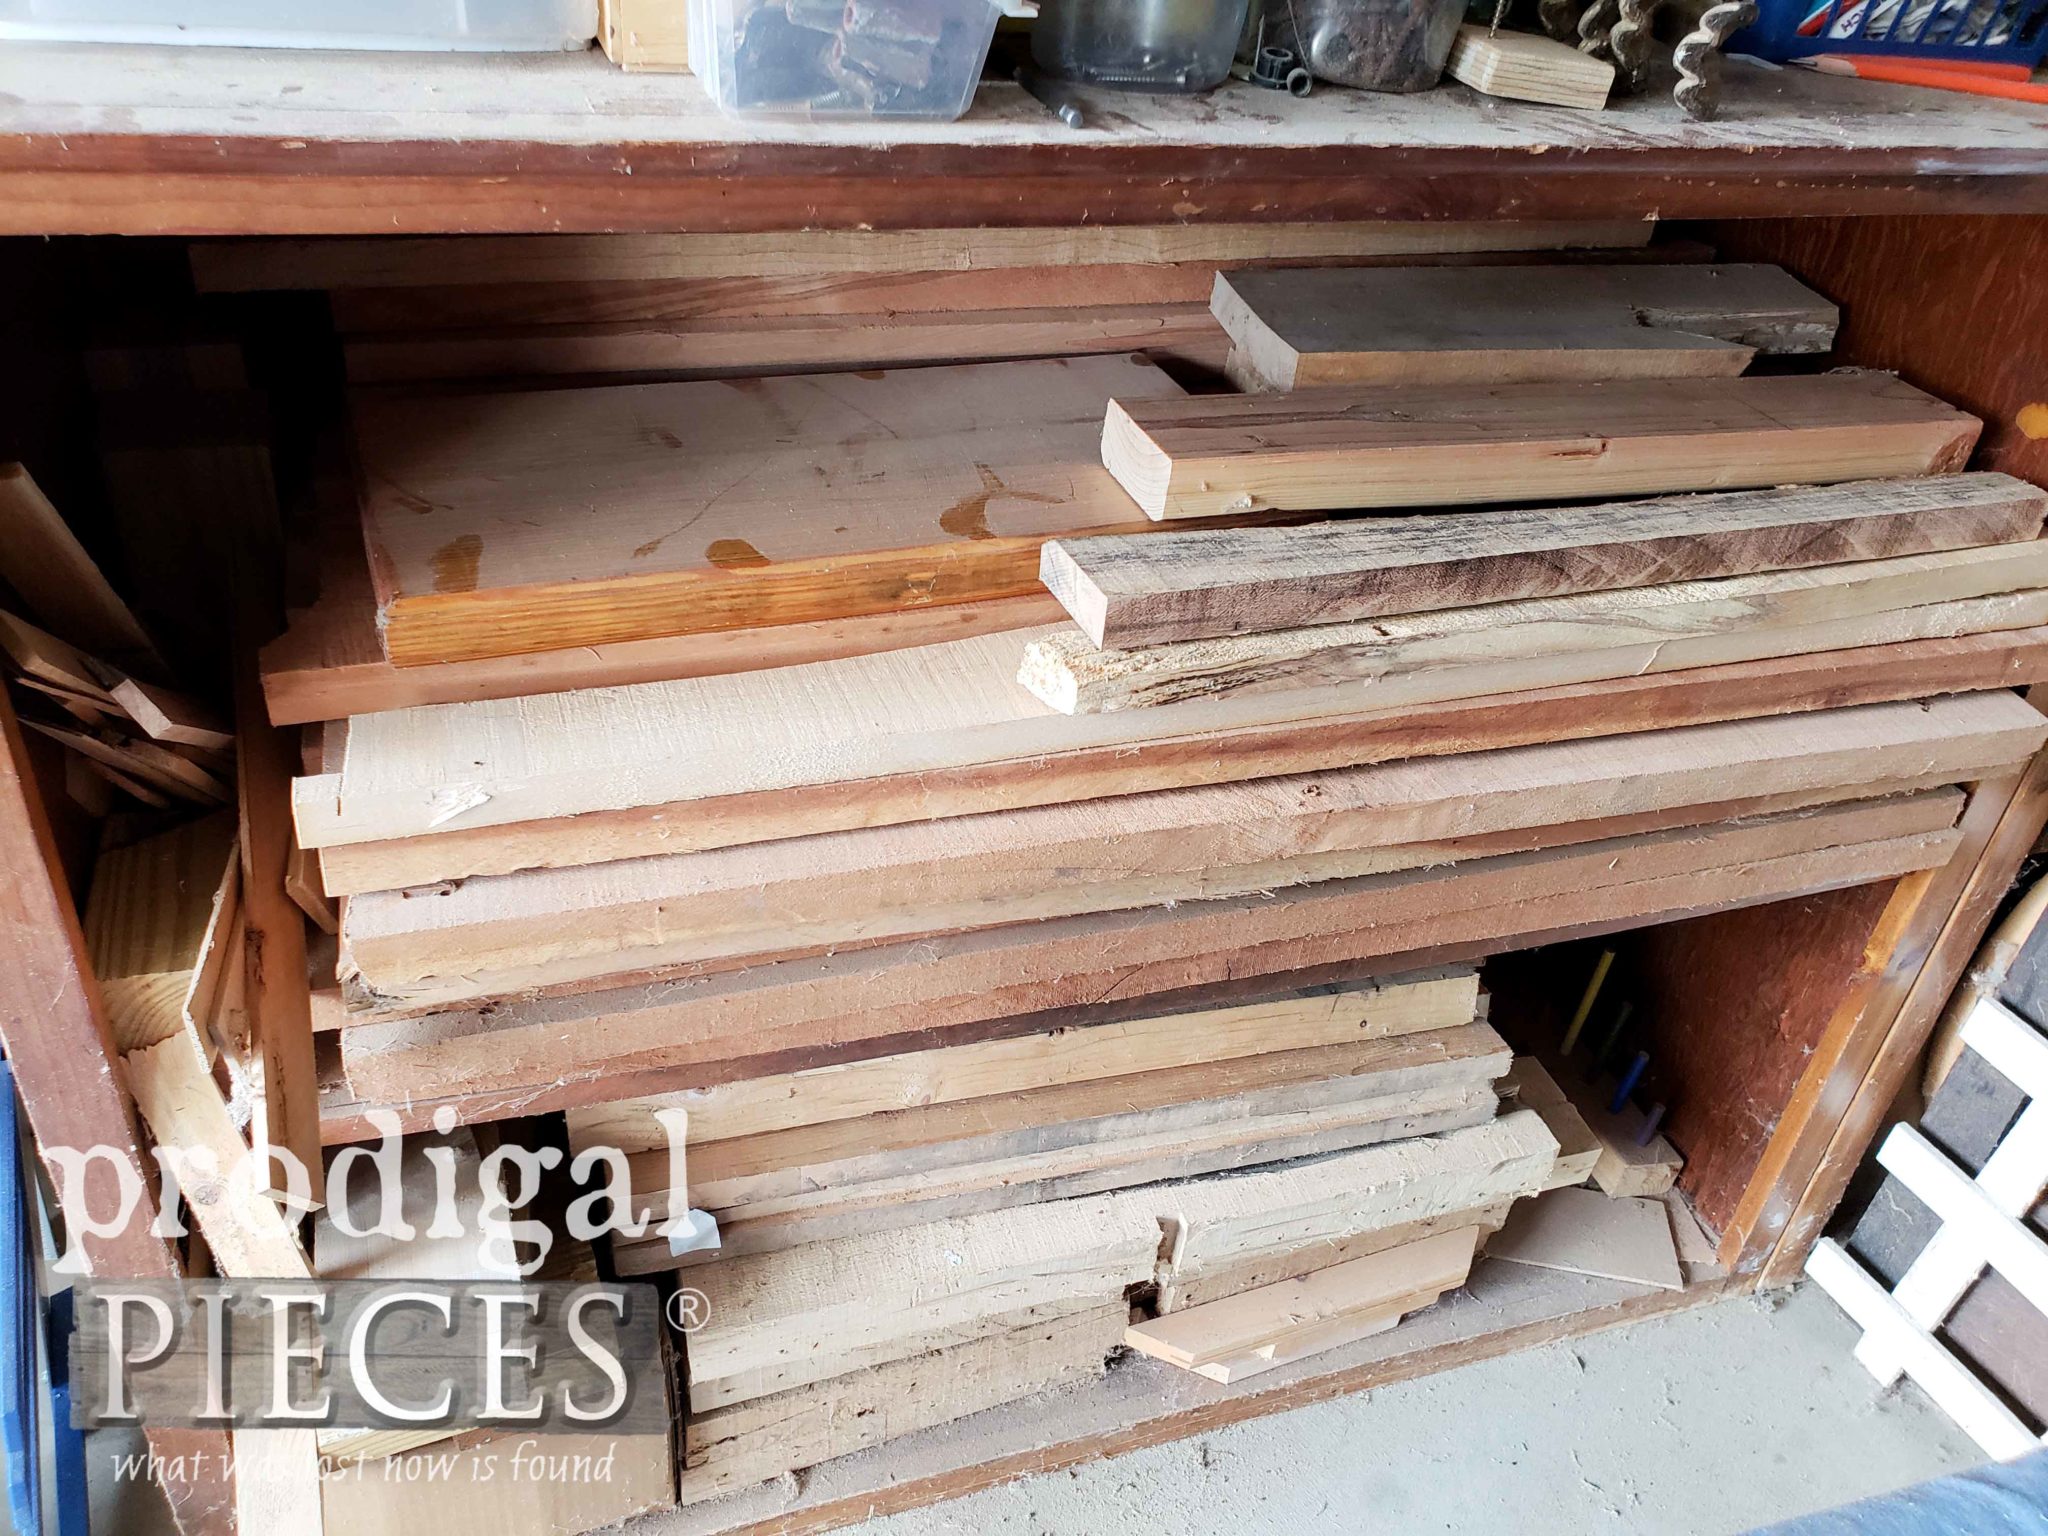 Stash of Reclaimed Hardwood Pallet Wood for DIY Bee Skep by Larissa of Prodigal Pieces | prodigalpieces.com